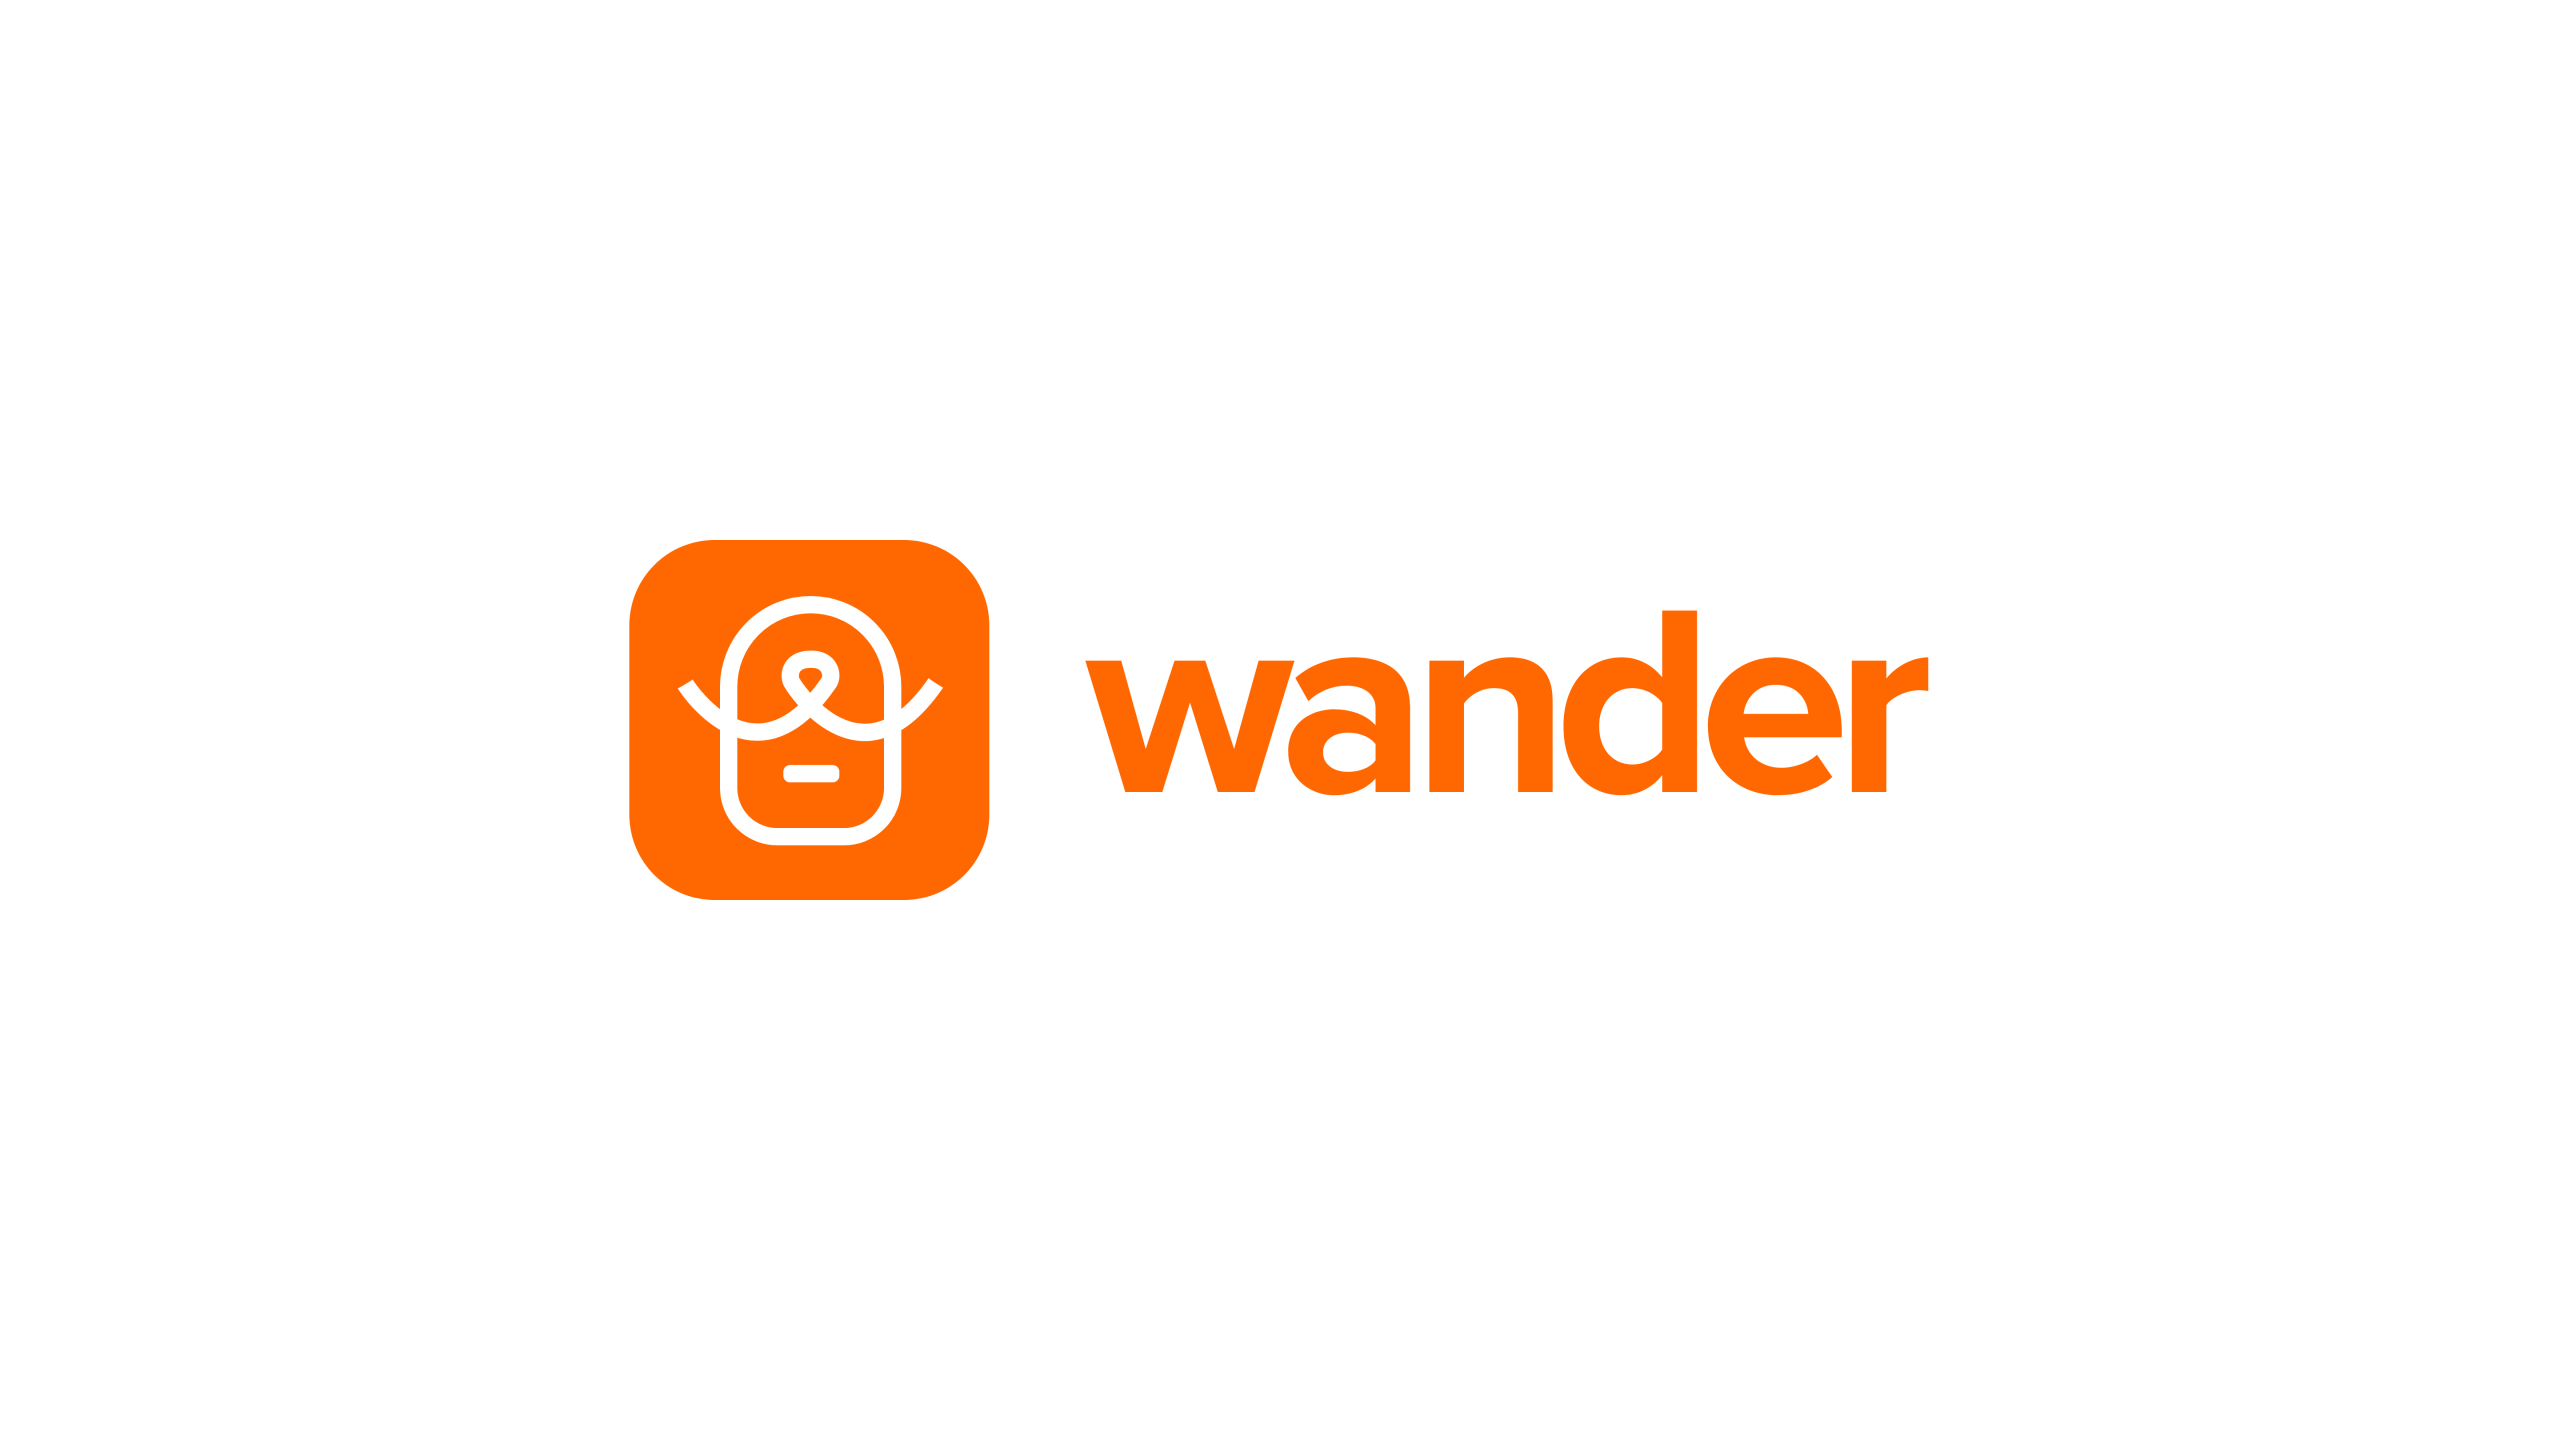 Wander - Find someone to join you, wherever you go